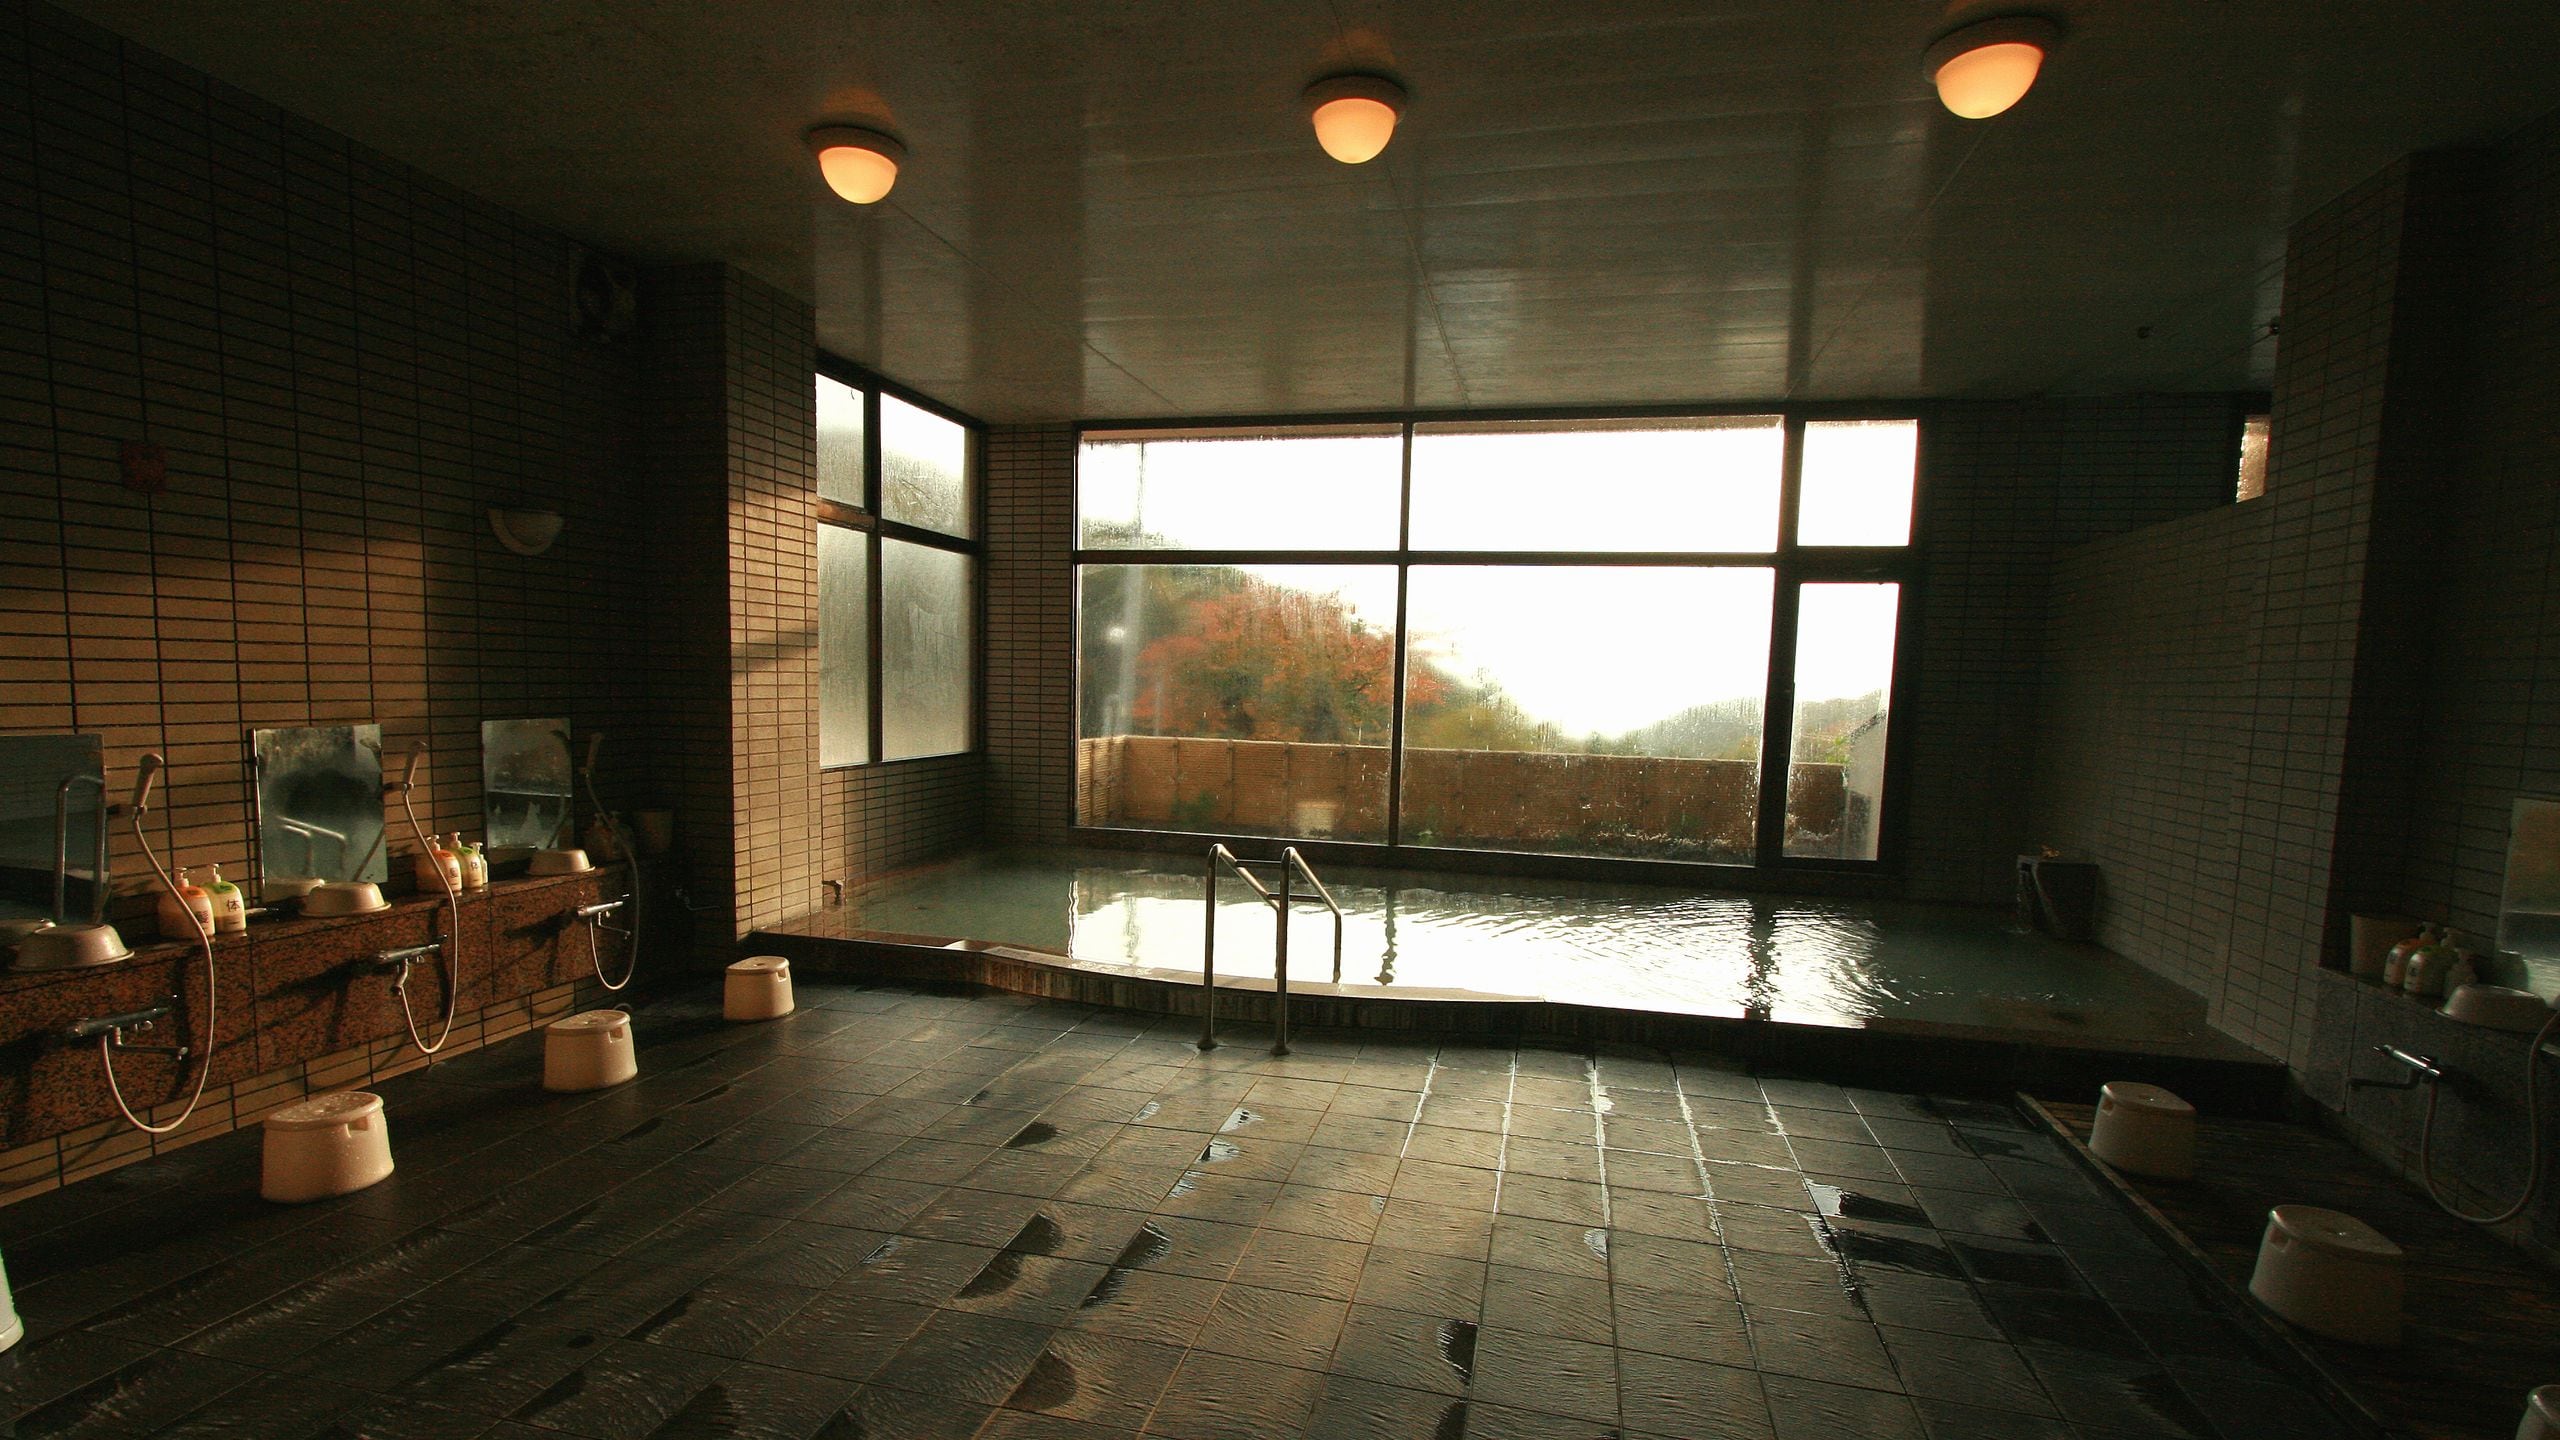 [Large communal bath in the building] Facility (overall view)